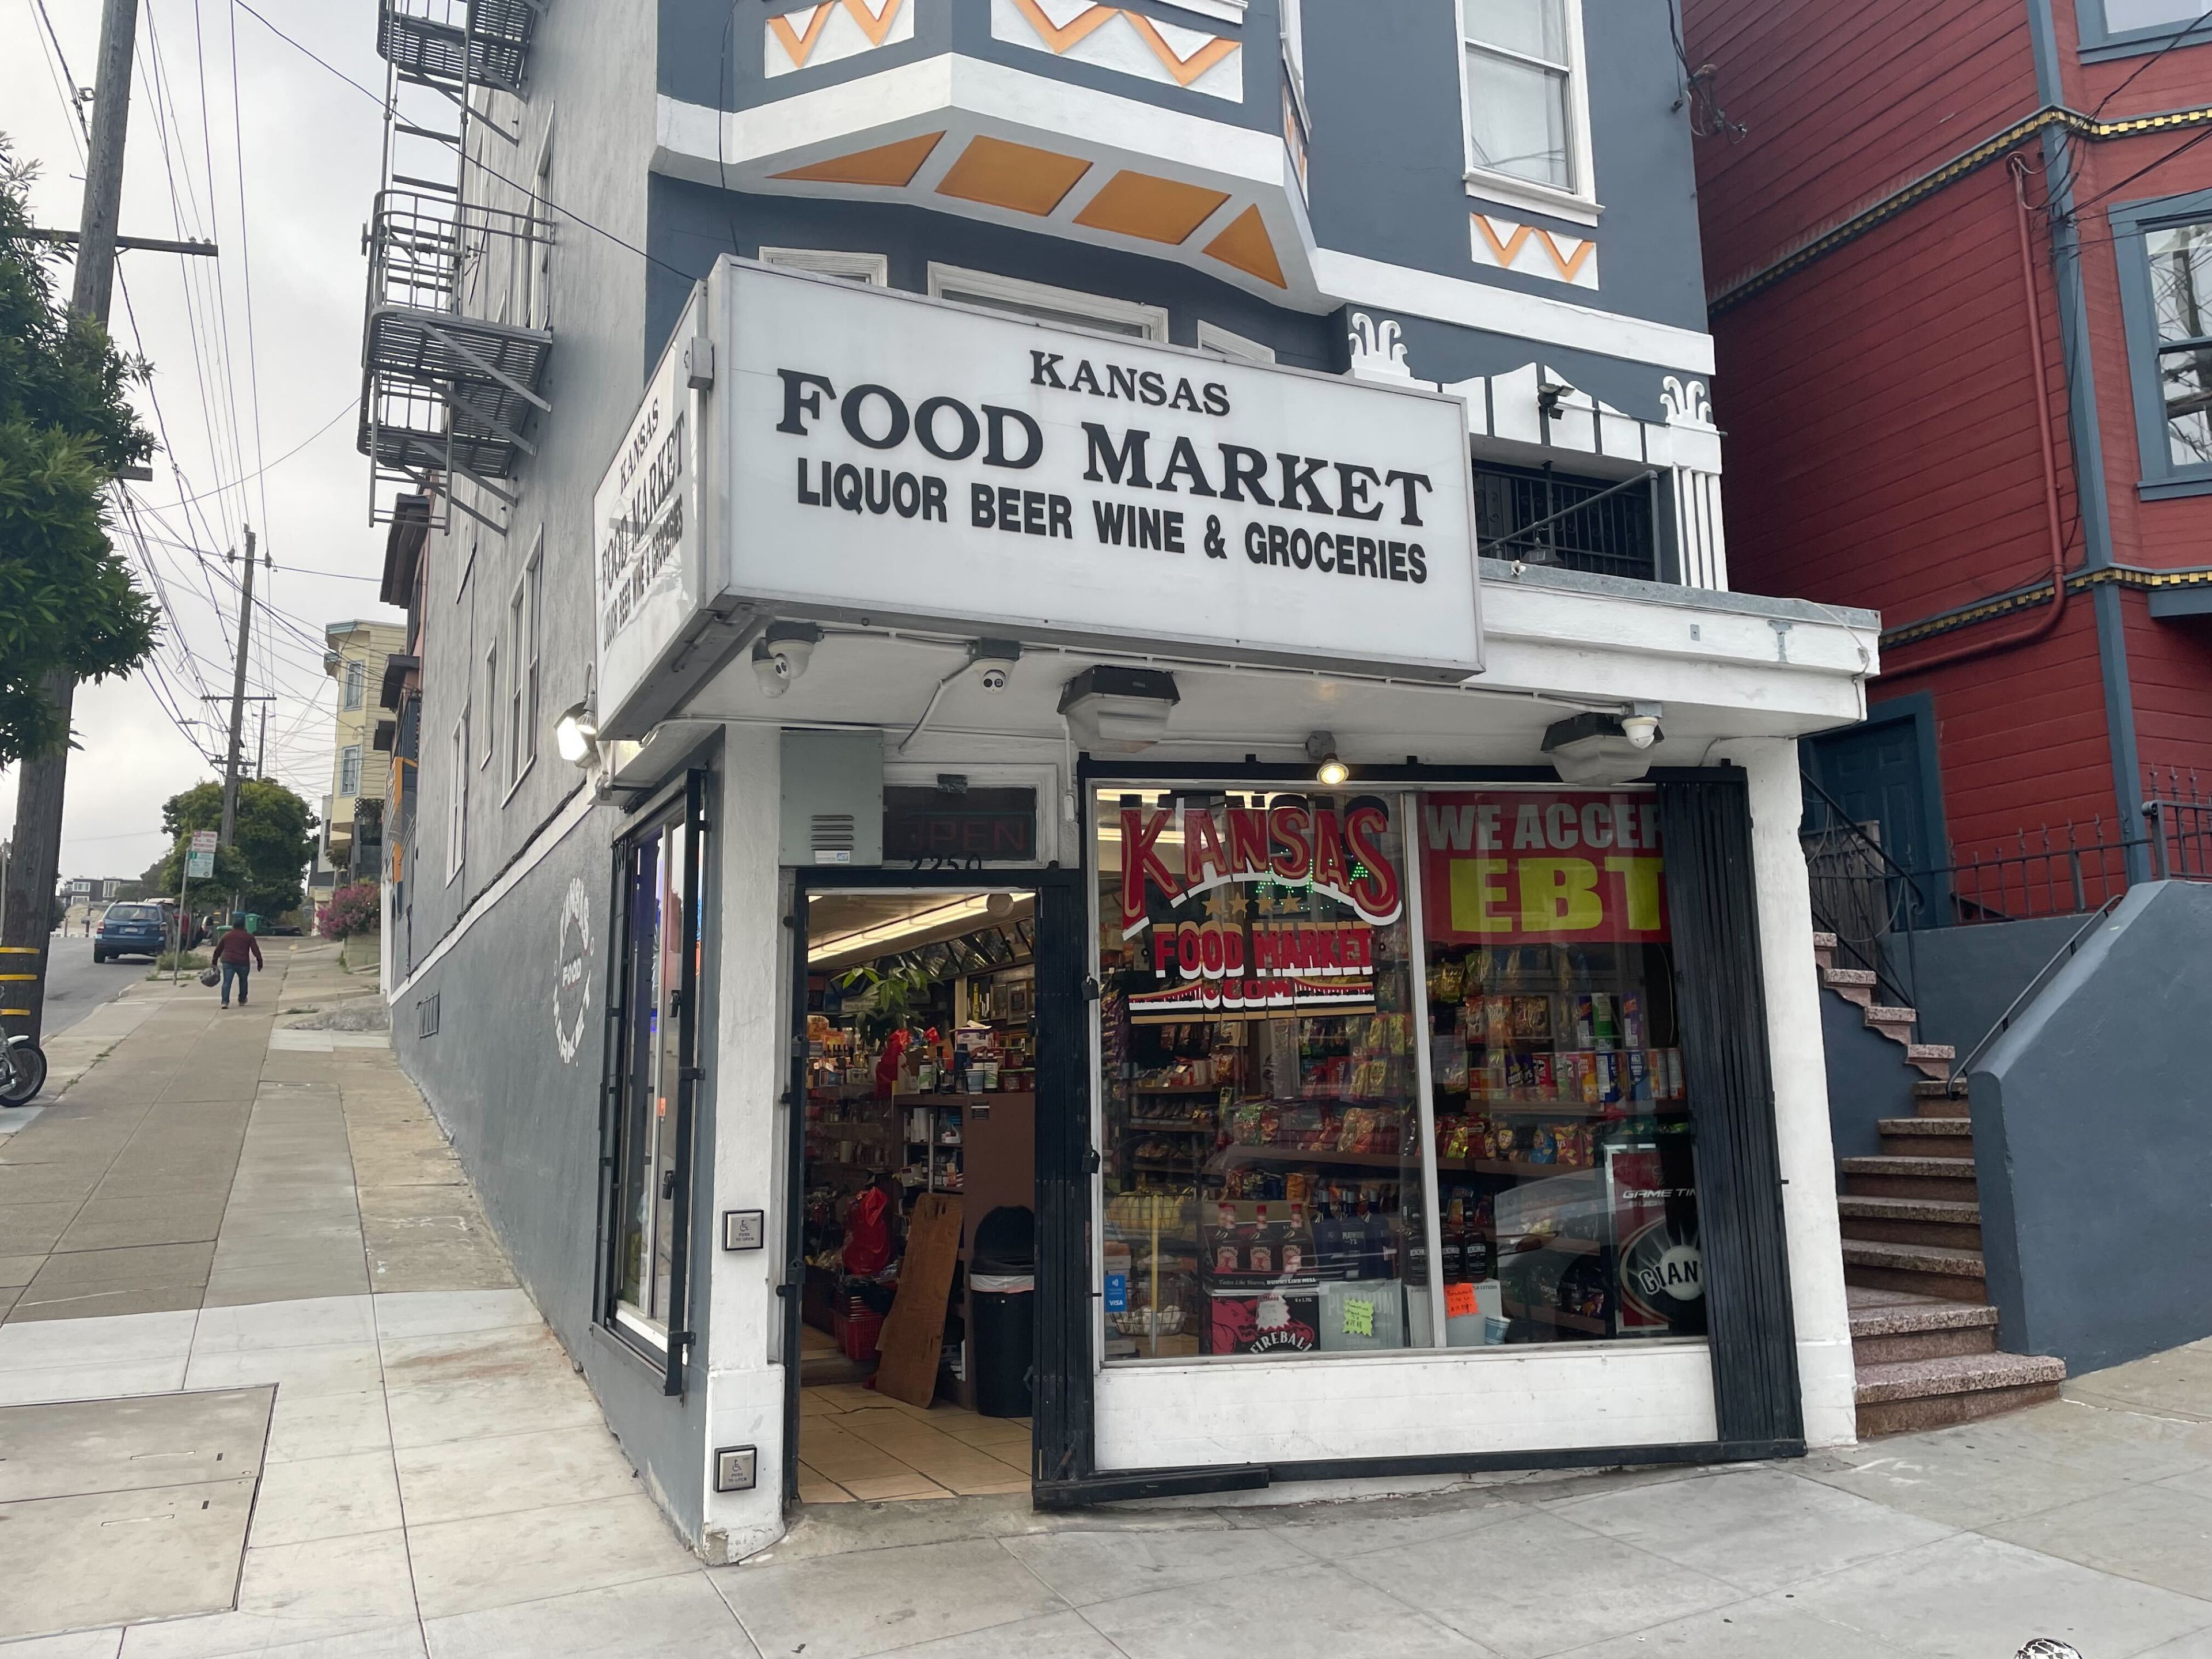 A corner store is seen in a photo.